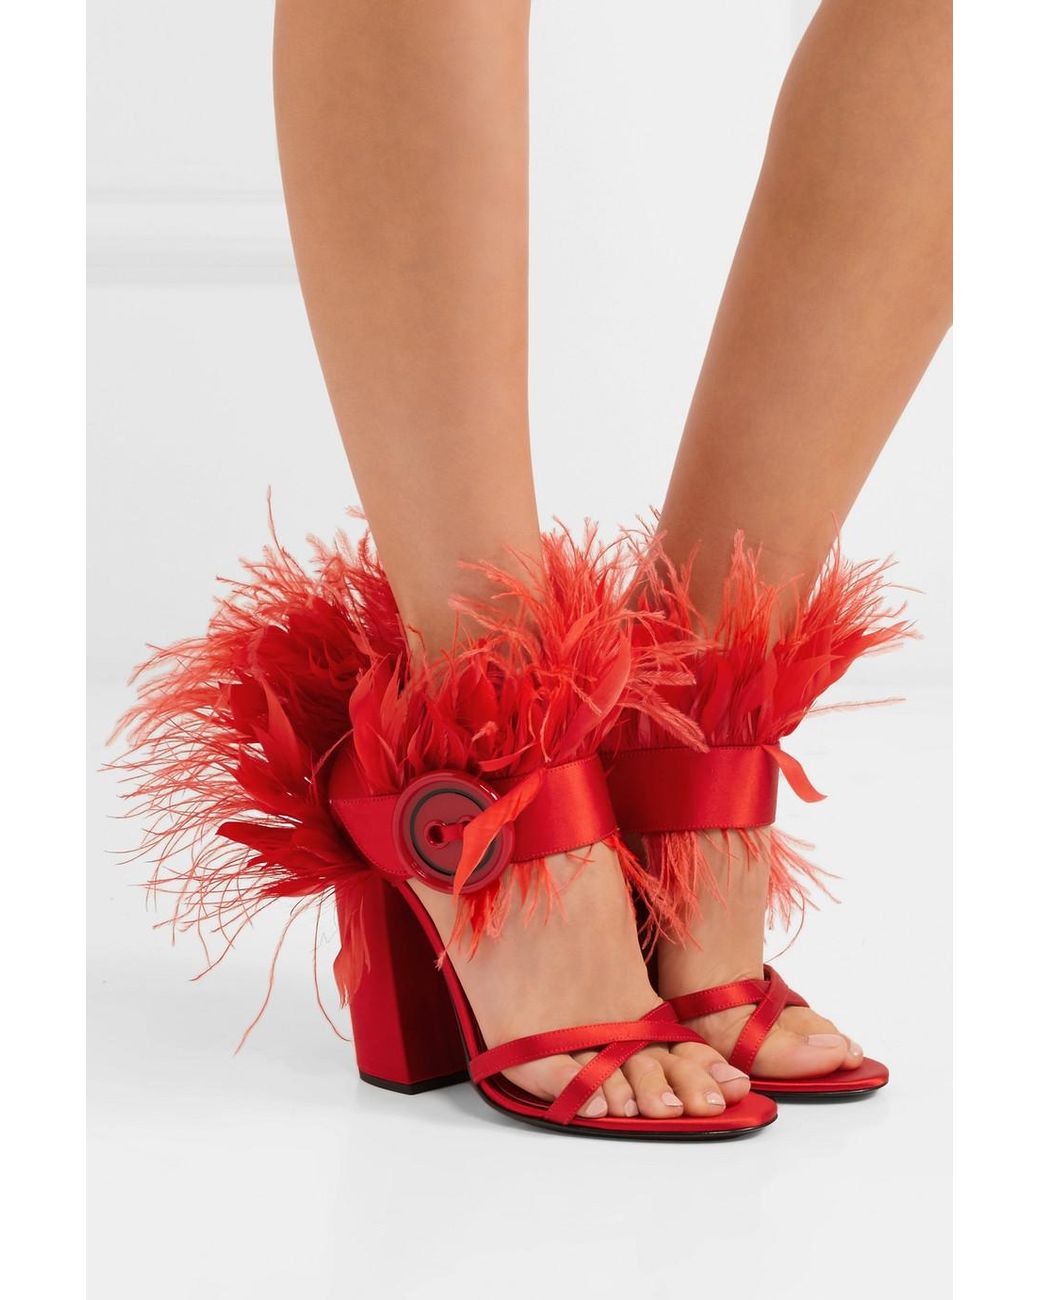 Prada Feather-trimmed Satin Sandals in Red | Lyst